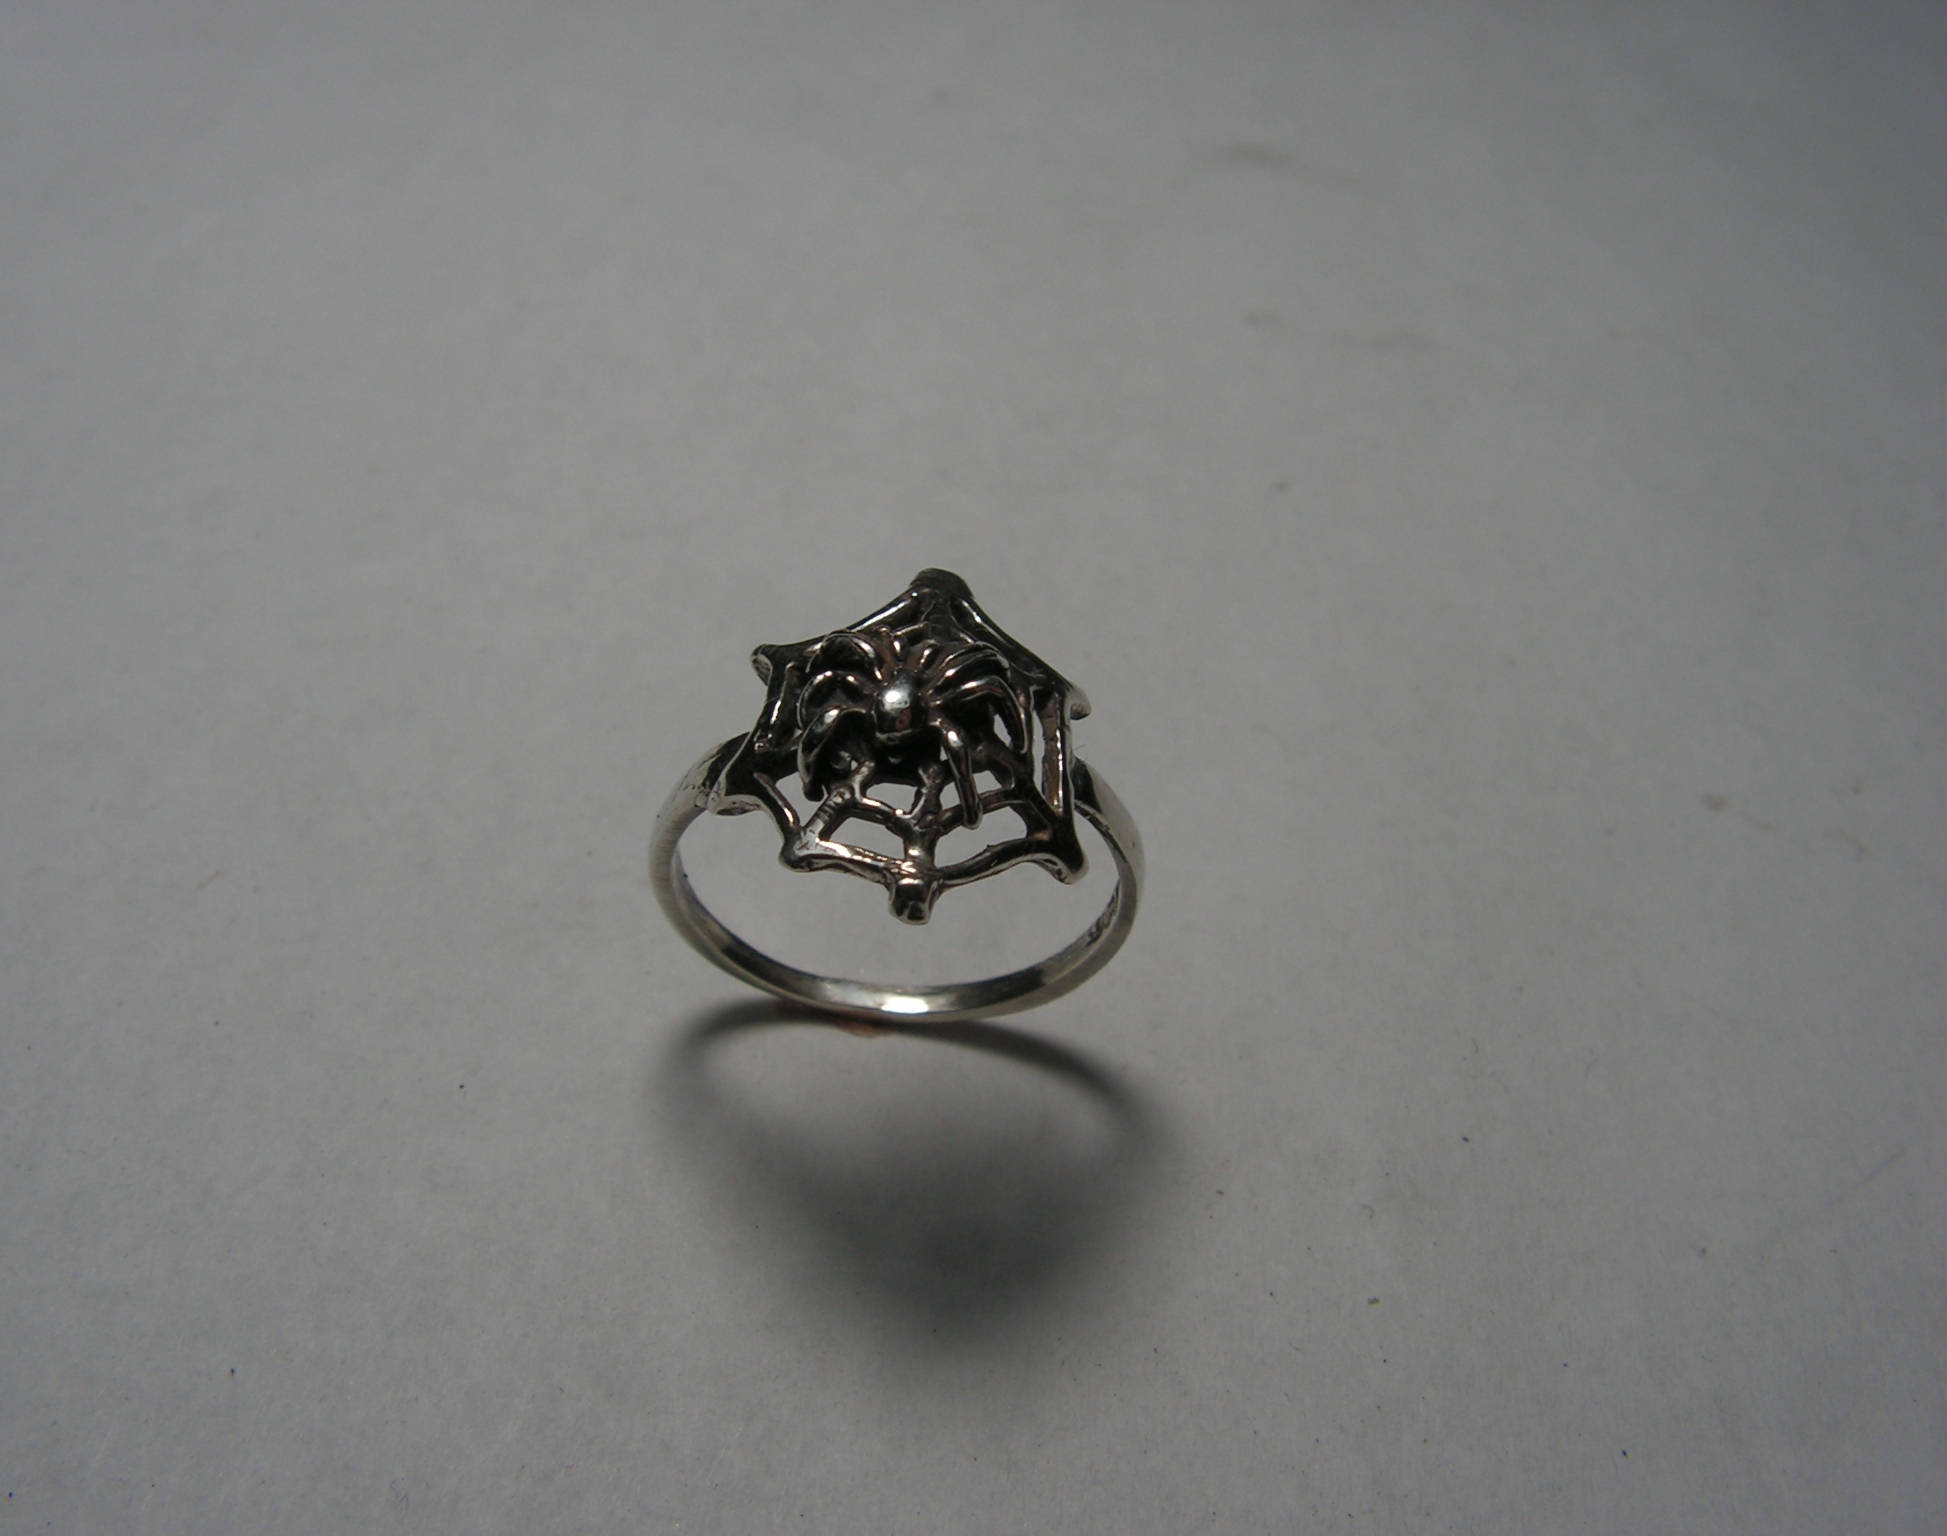 Spider on Web Ring in Sterling Silver - Etsy